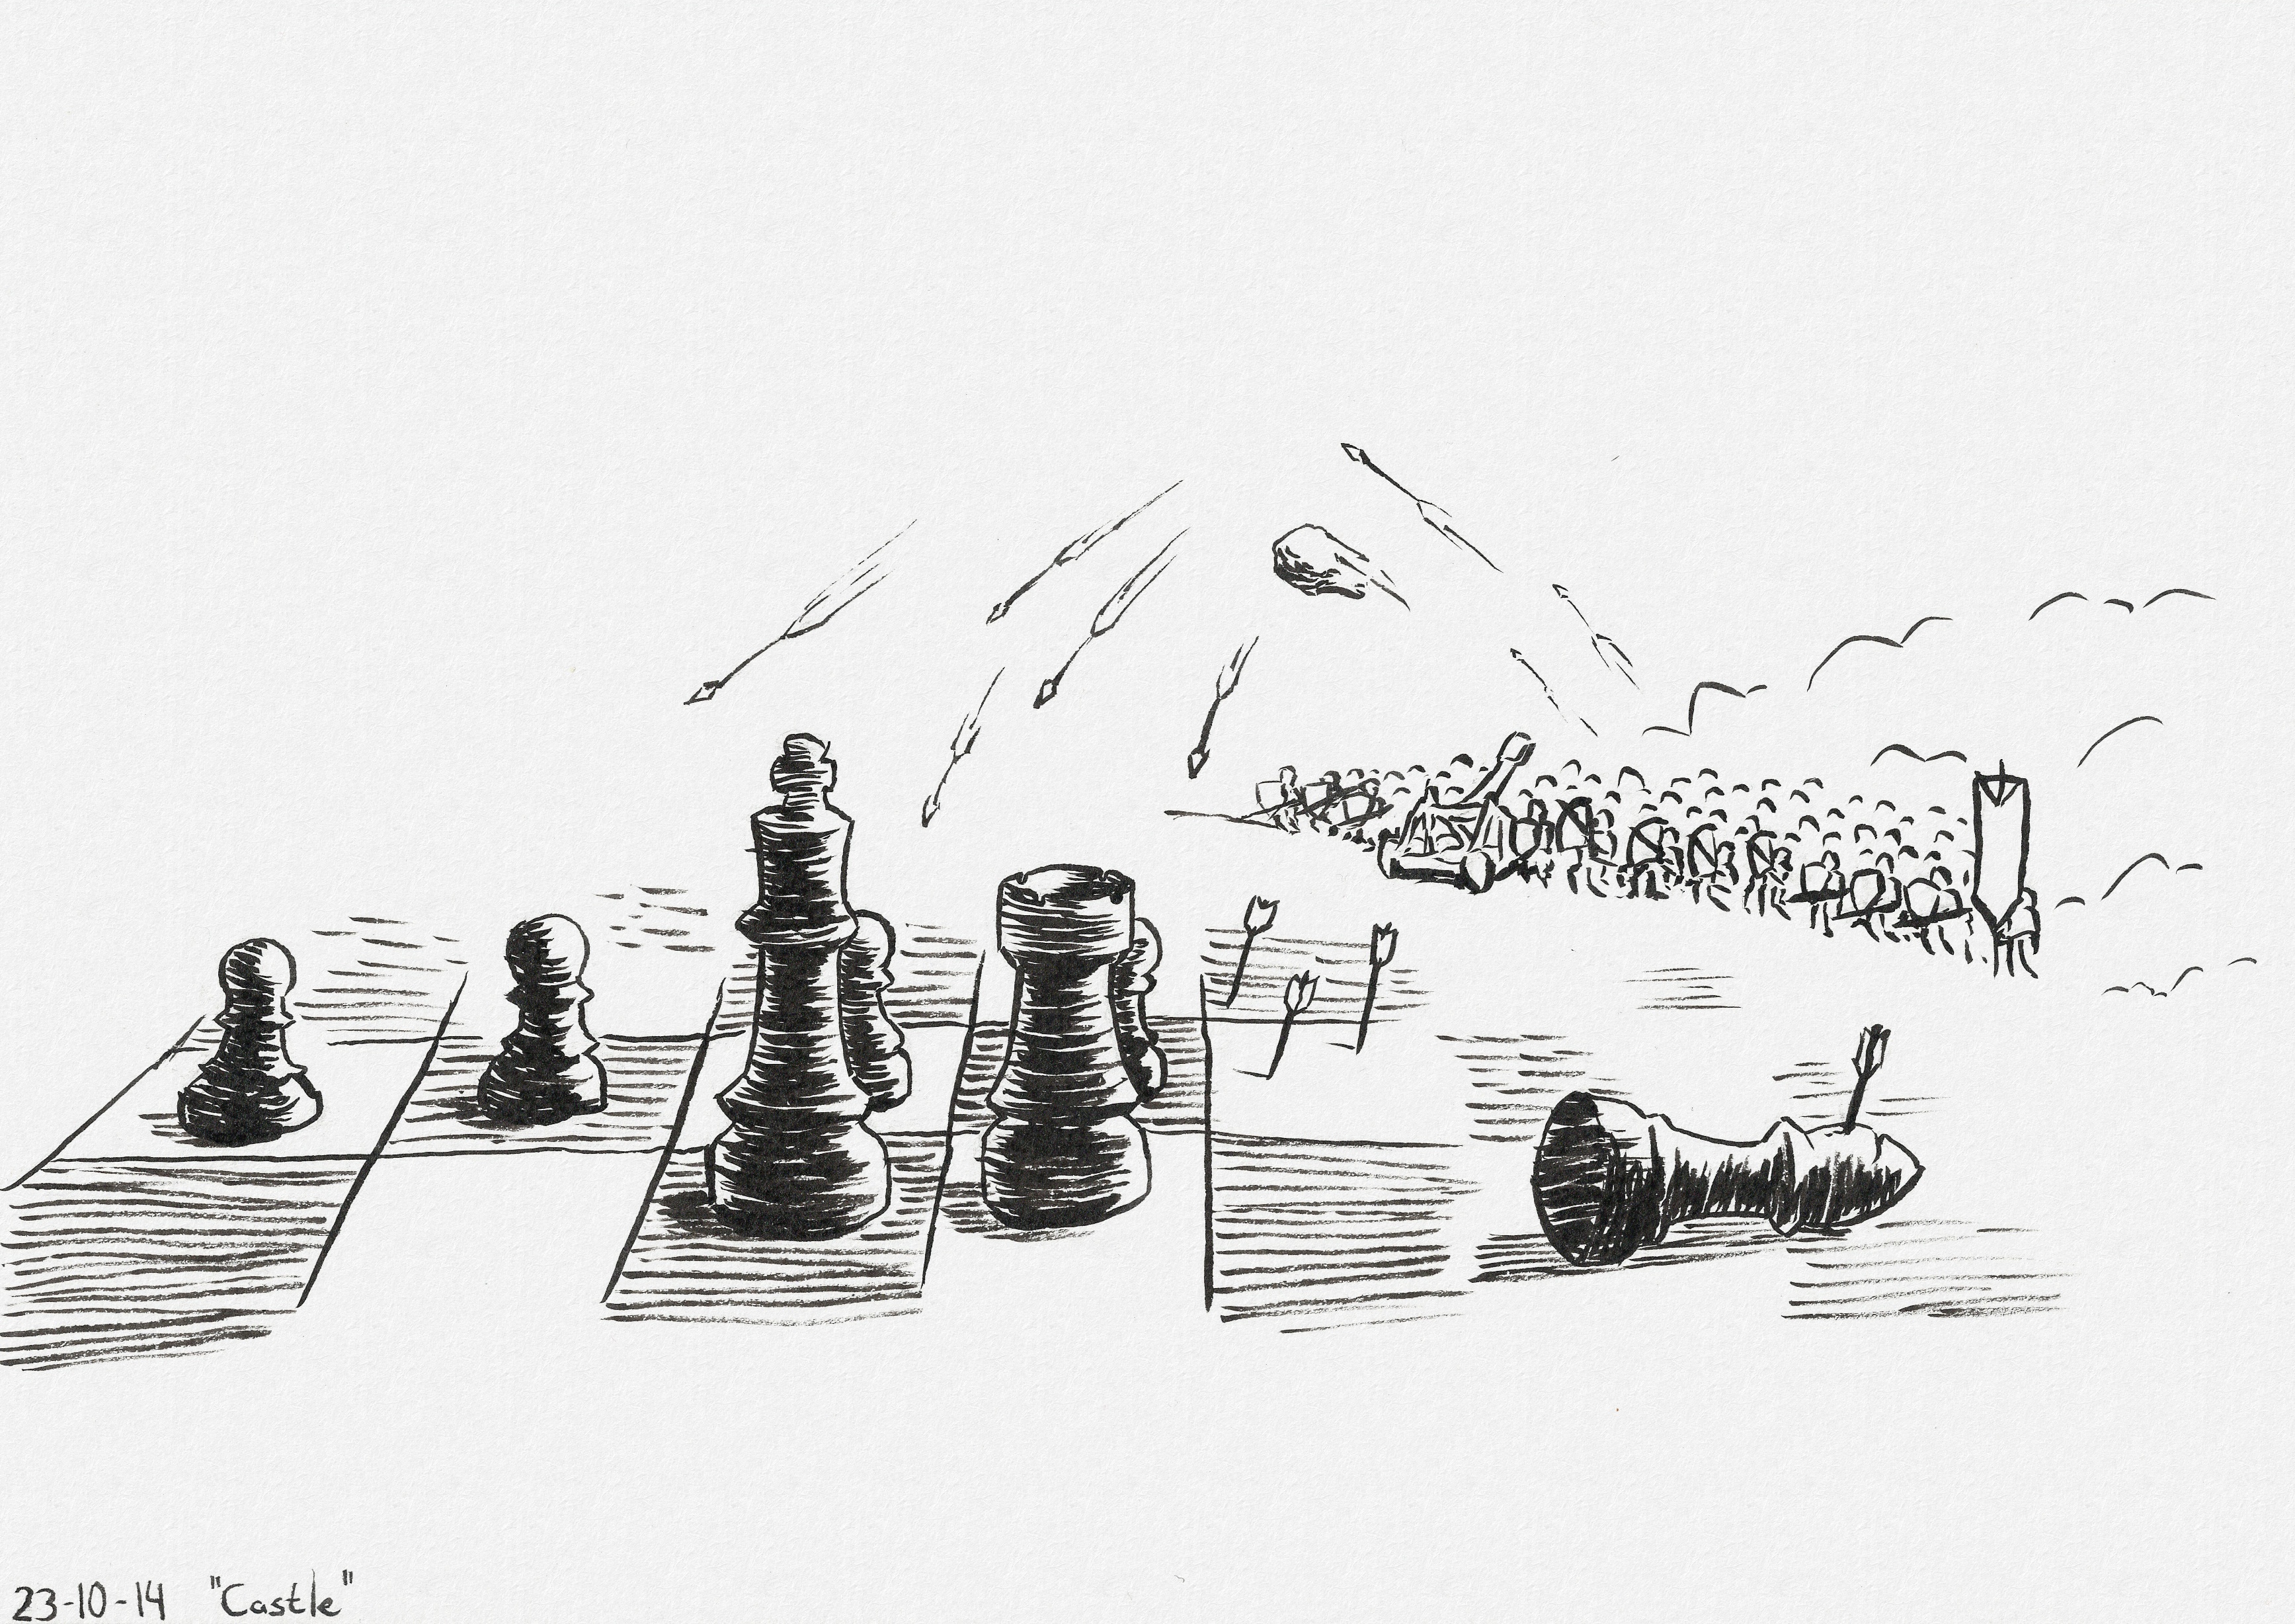 A chess board in castled position. A few rows away the board fades into an army shooting arrows and rocks at the pieces. A bishop lies on the ground pierced by an arrow.